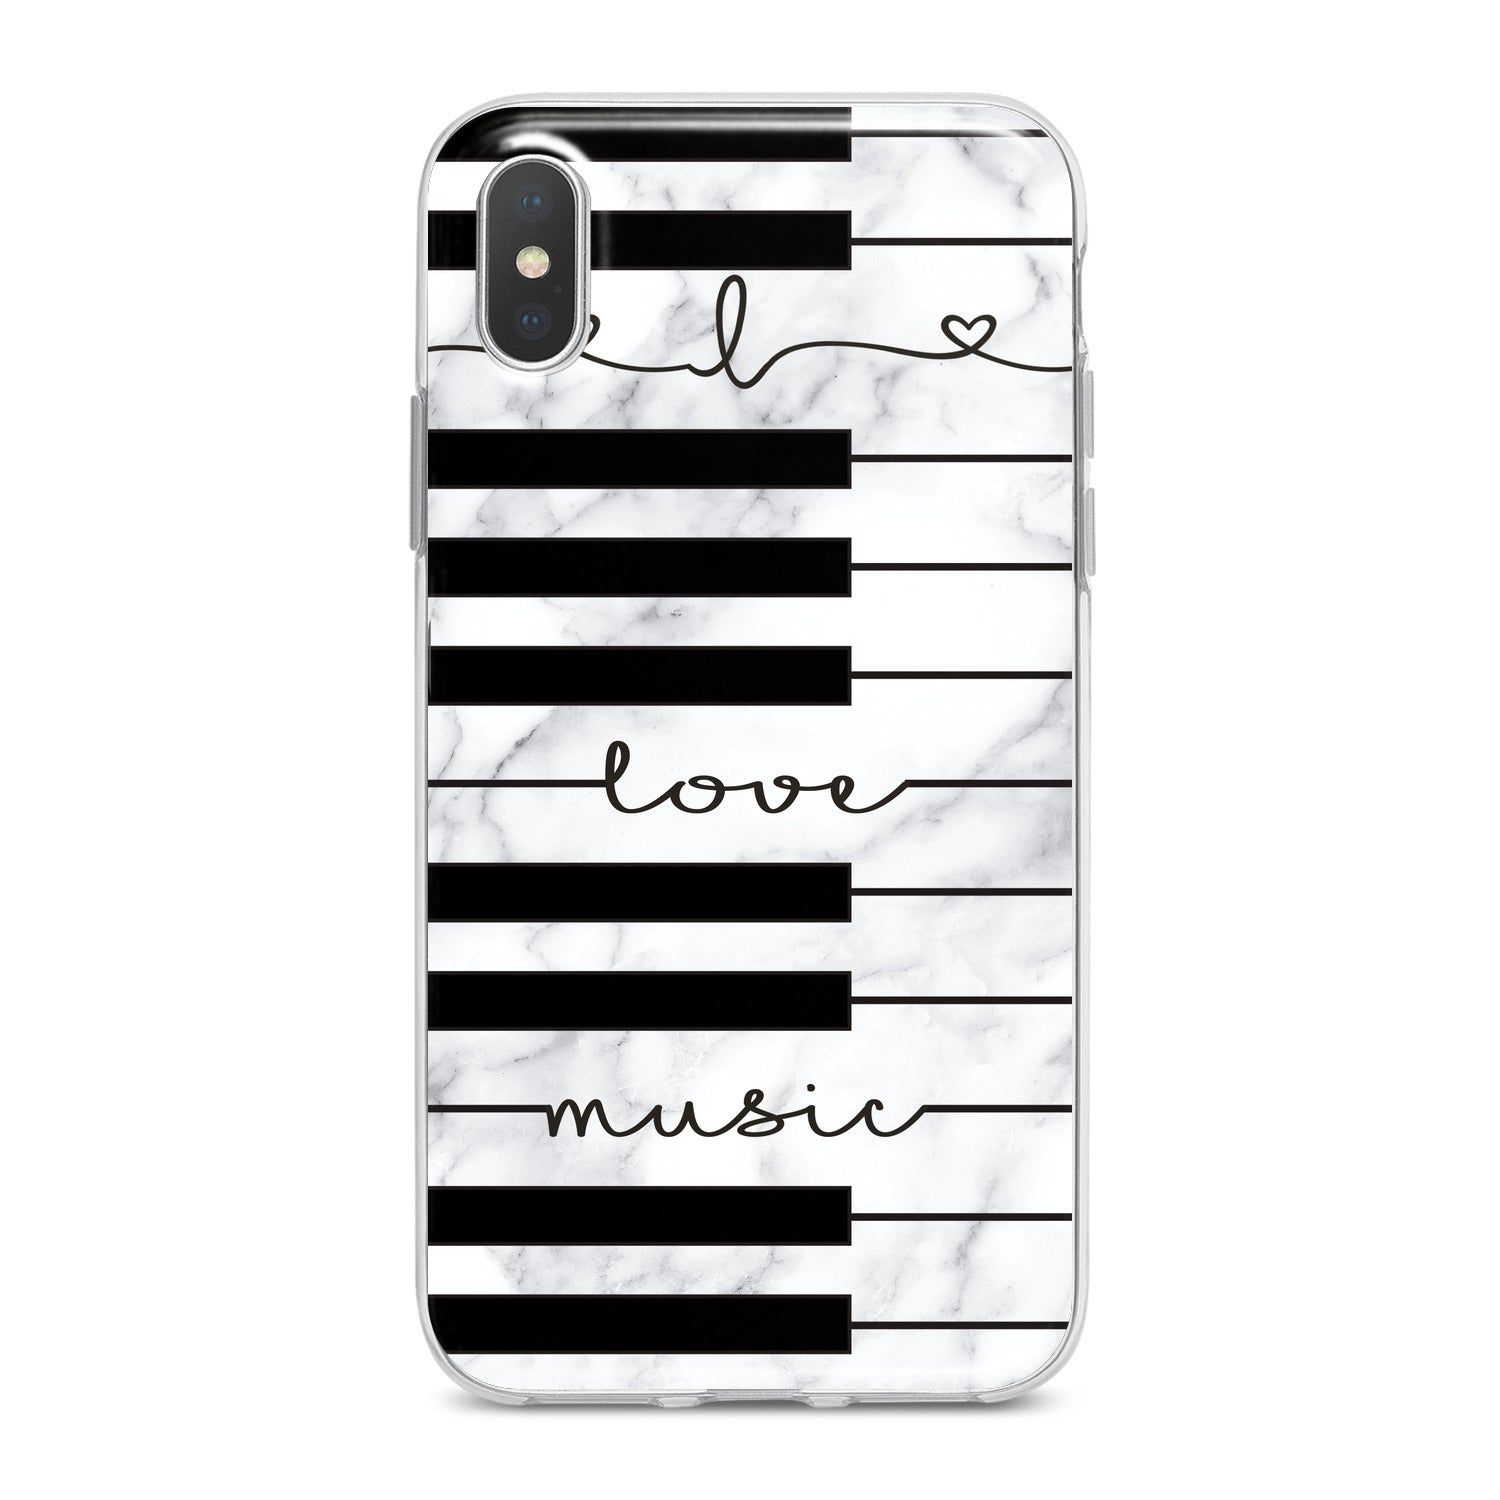 Lex Altern Lovely Piano Keys Phone Case for your iPhone & Android phone.